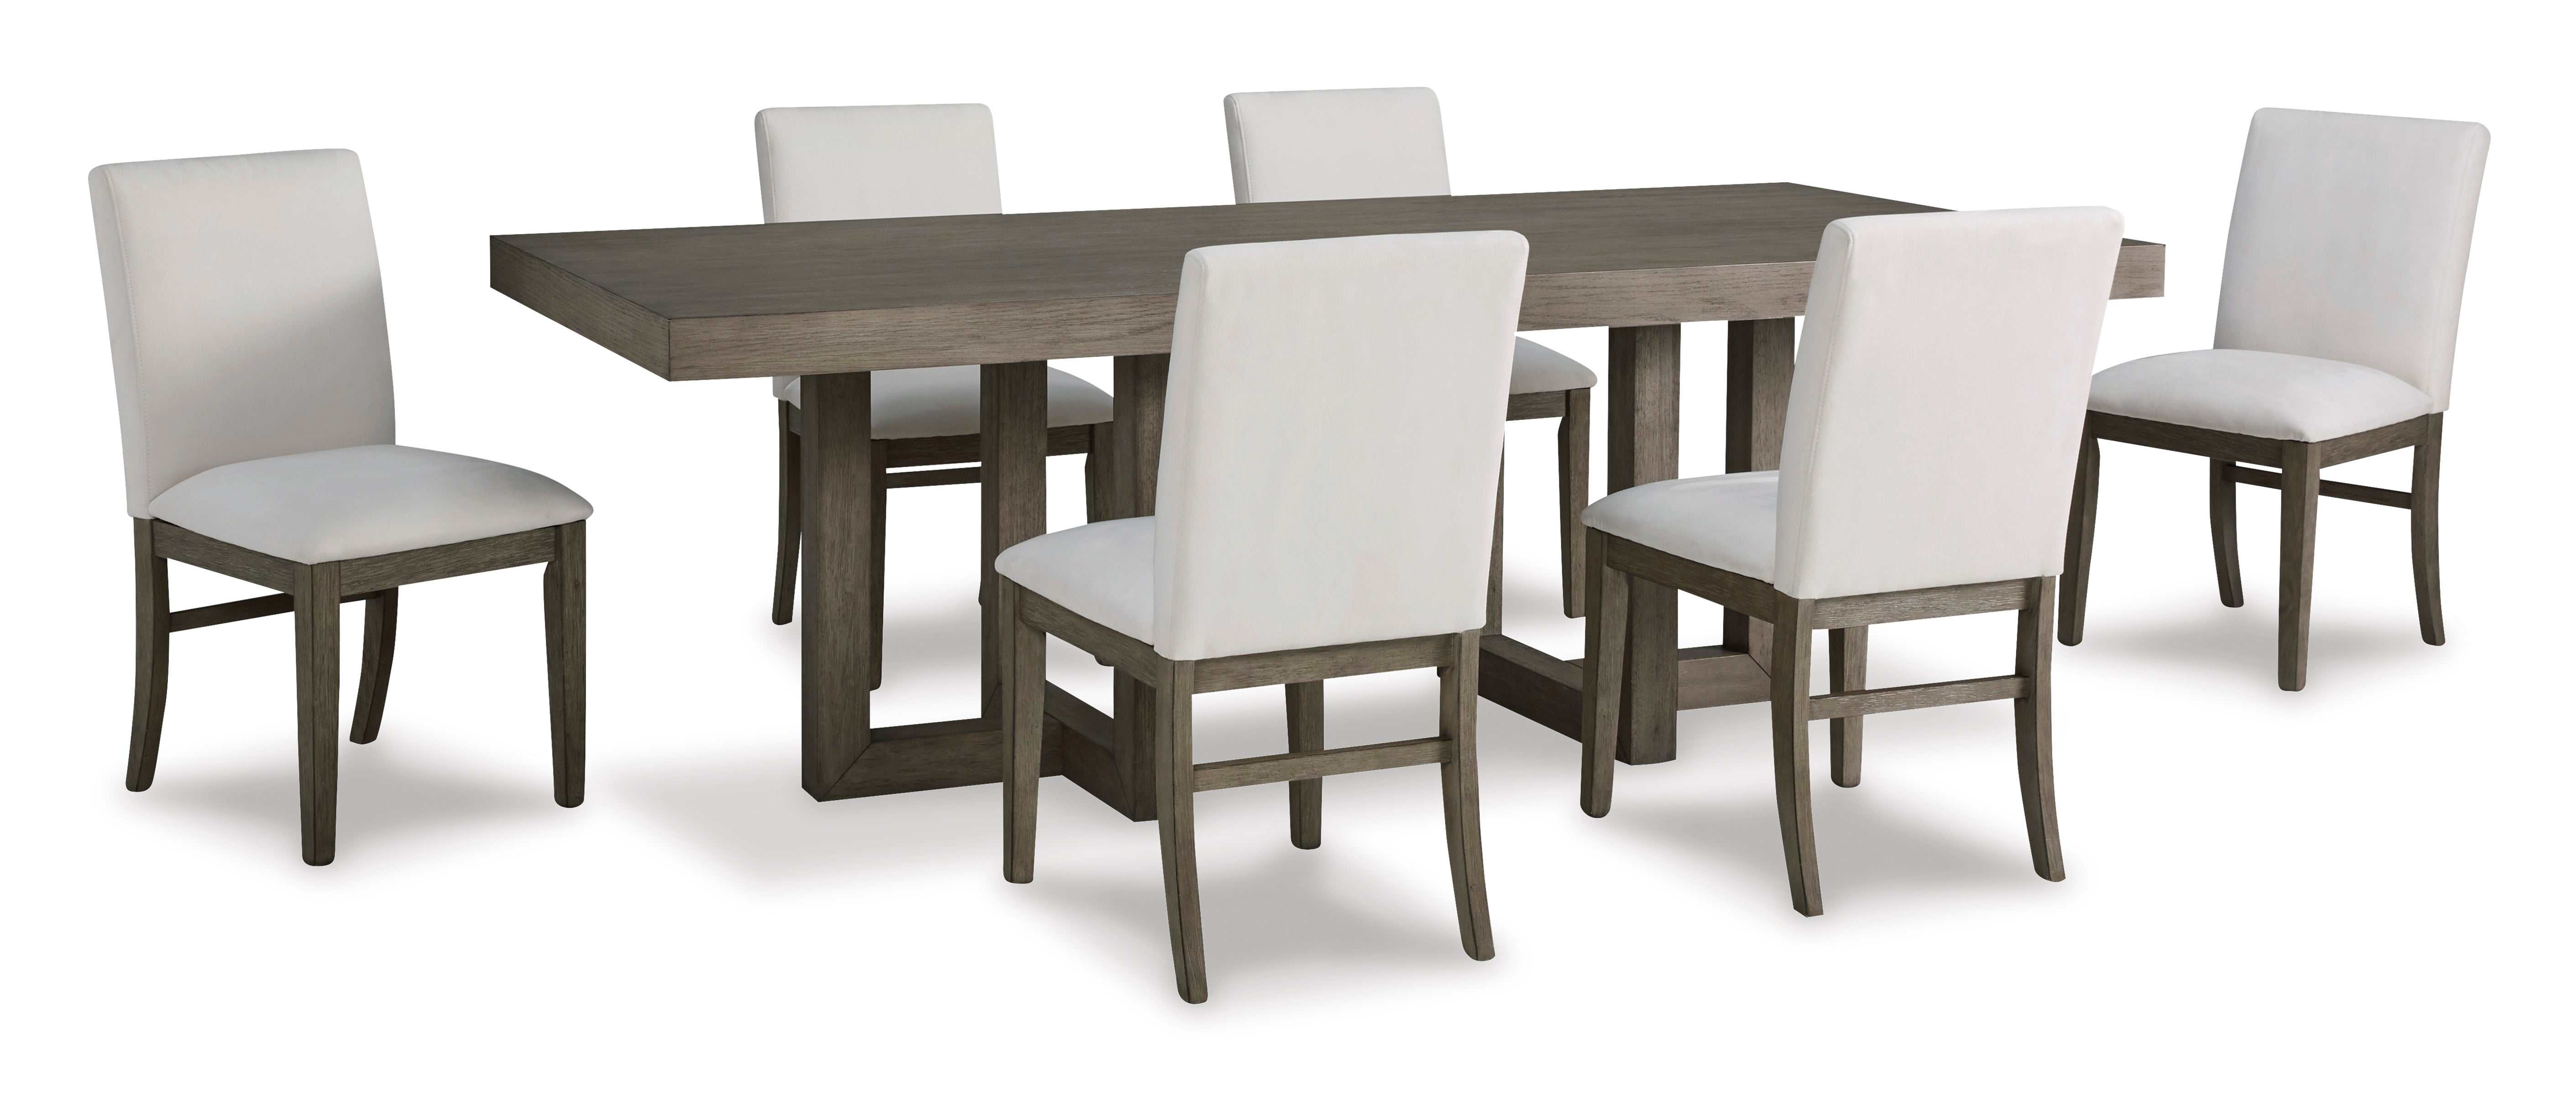 Anibecca Gray & Off White Dining Chair (Set of 2)